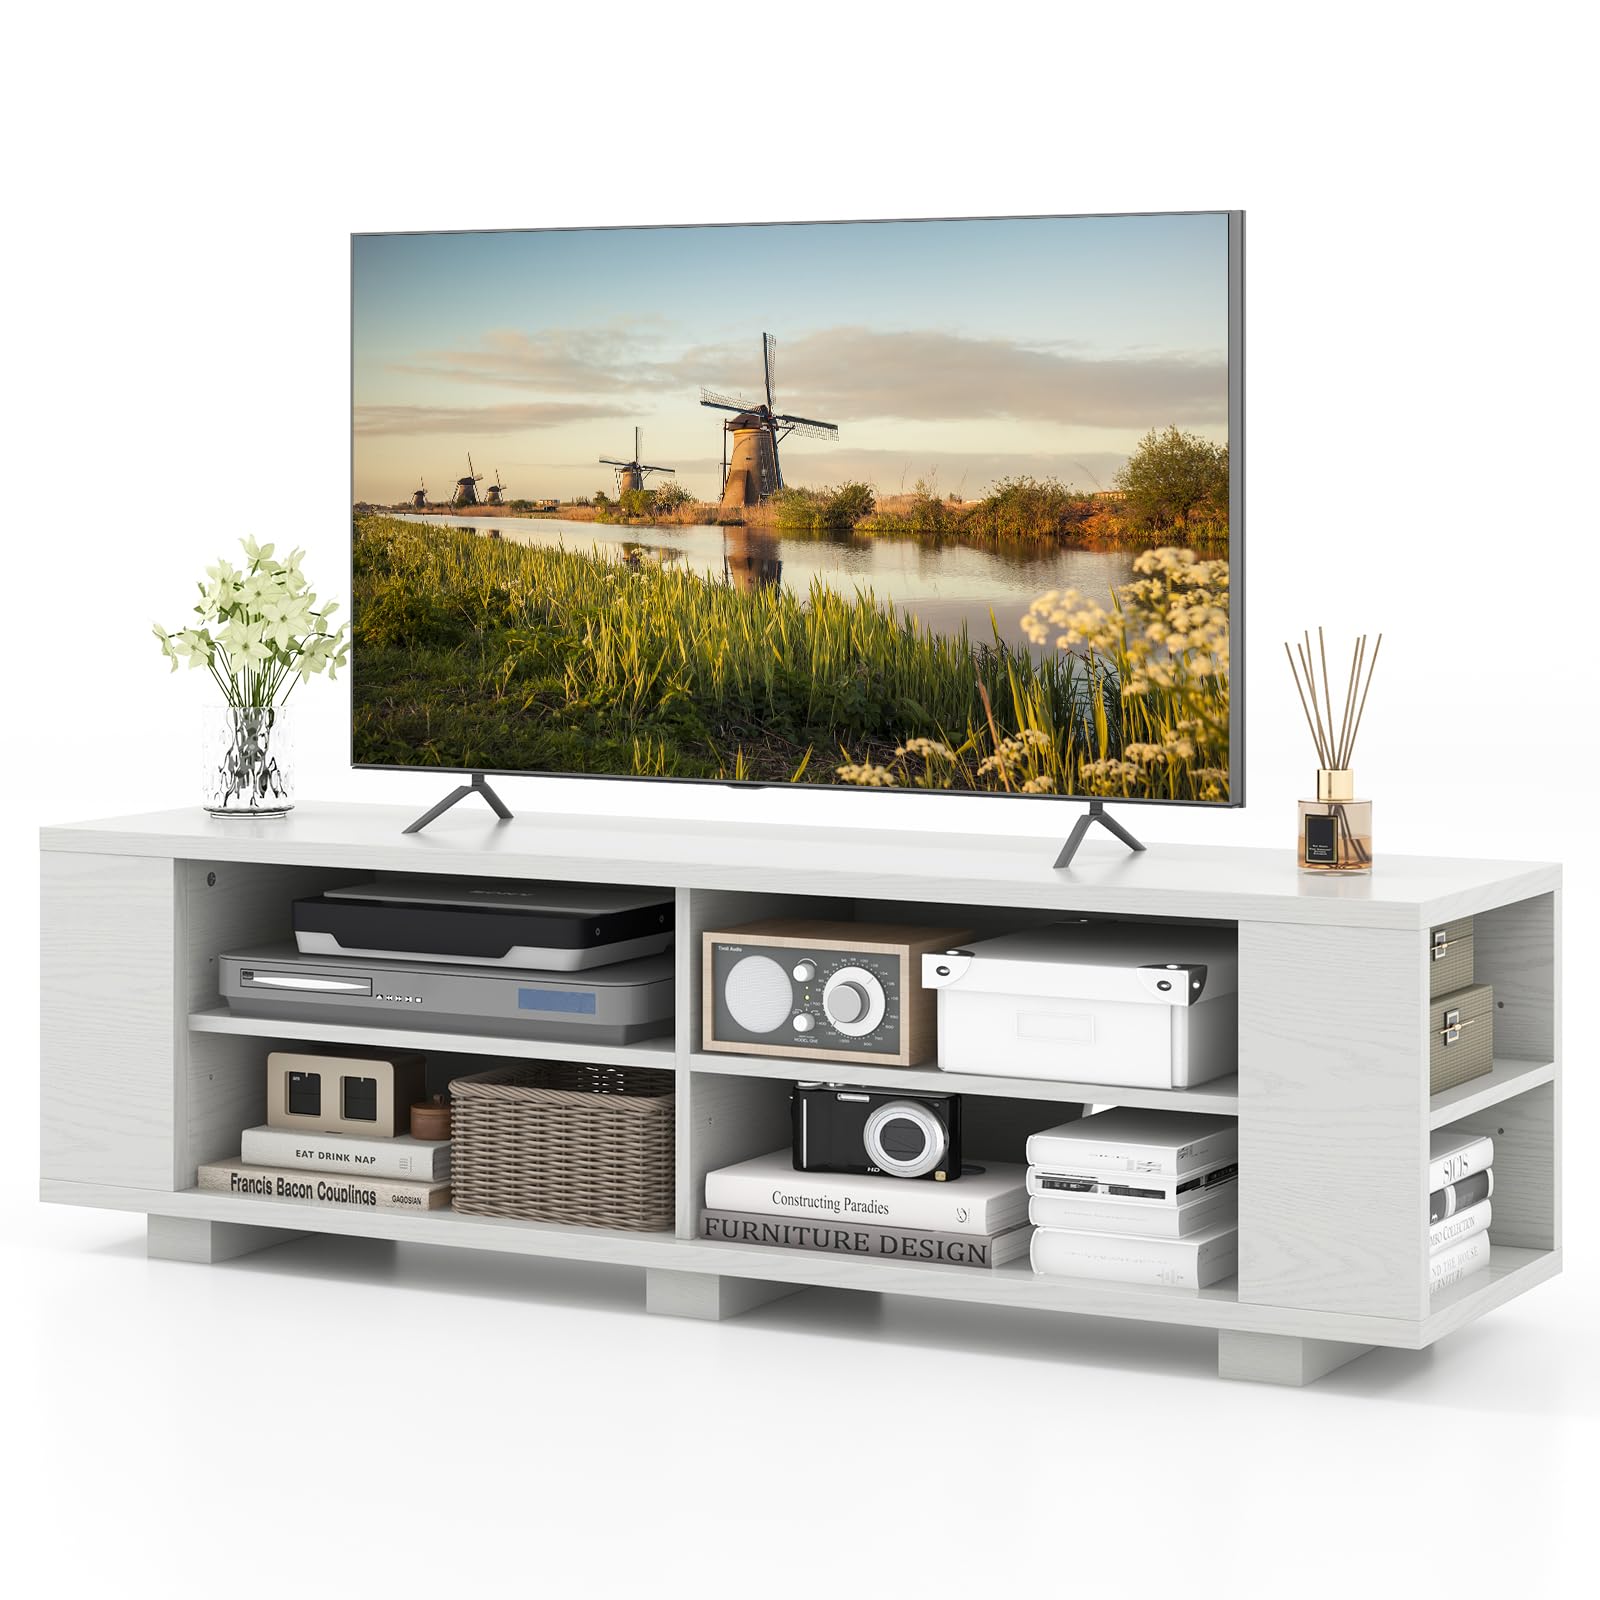 Giantex TV Stand Entertainment Center - Farmhouse Television Table up to 65 Inches TVs, 7 Colors